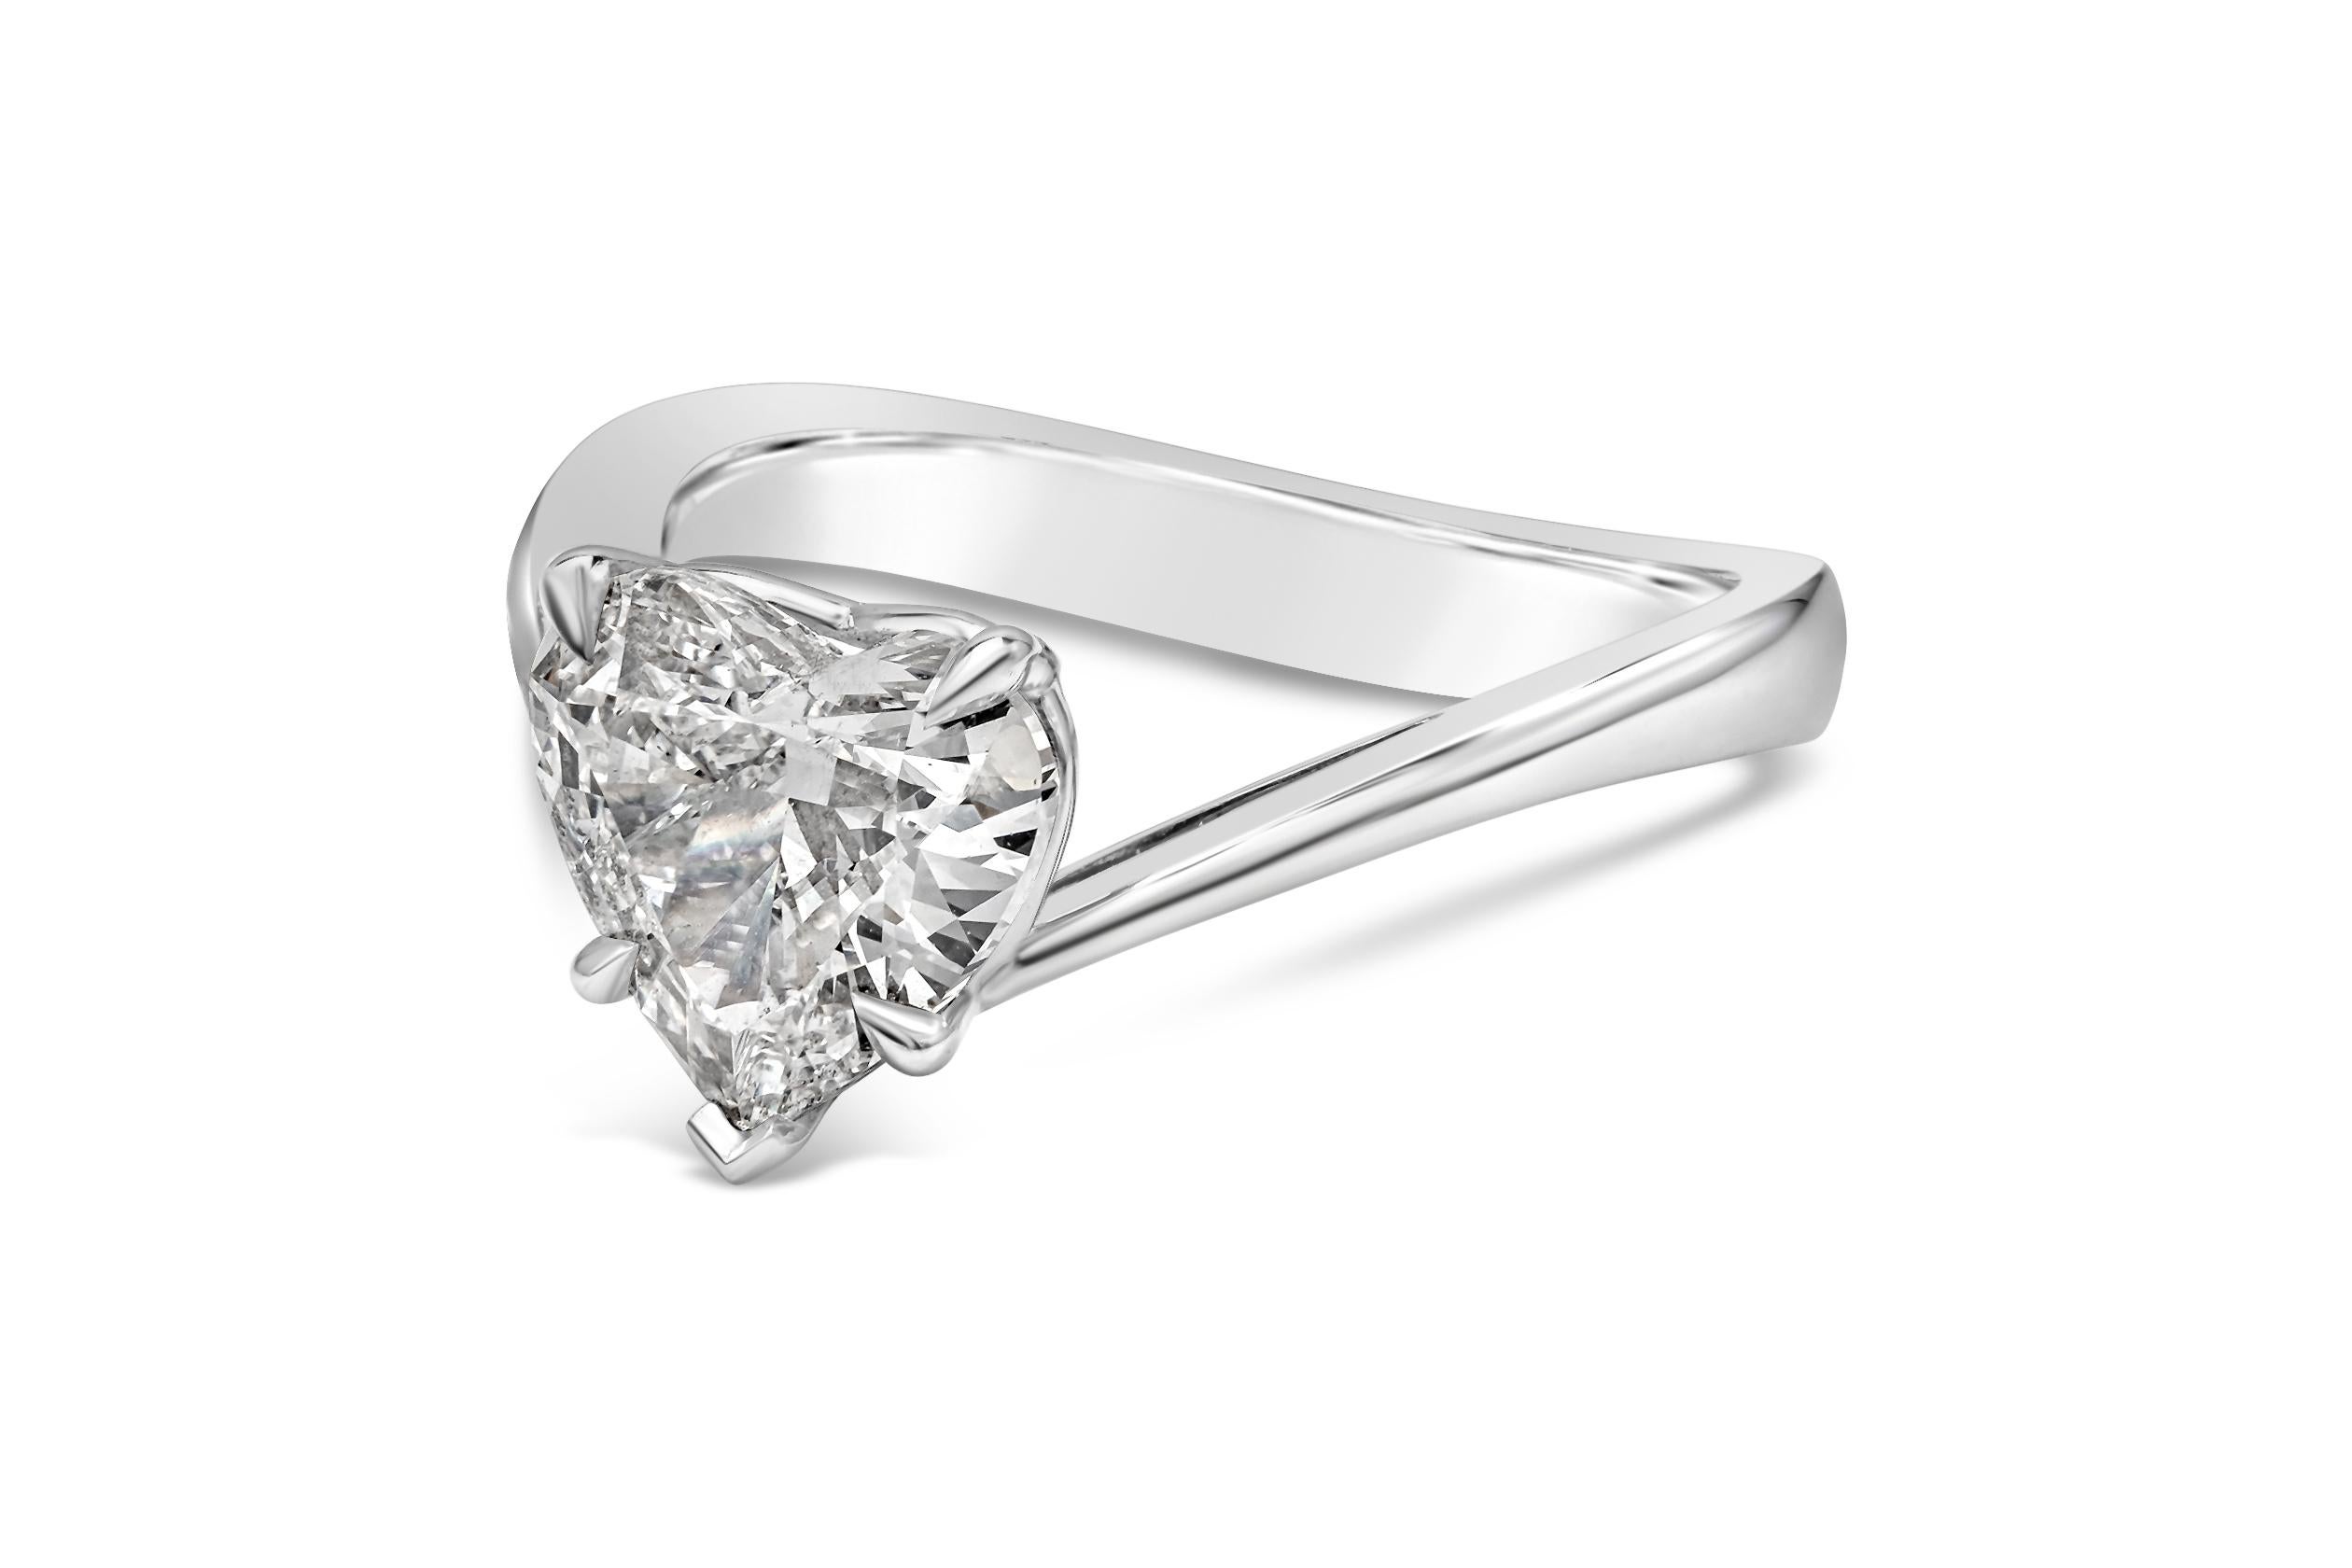 A well crafted engagement ring showcasing a 2.00 carats total heart shape diamond set in a chic contoured band and made in platinum. GIA Certified heart shape diamond is classified as F color and SI2 in clarity. Size 6.25 US and resizable upon